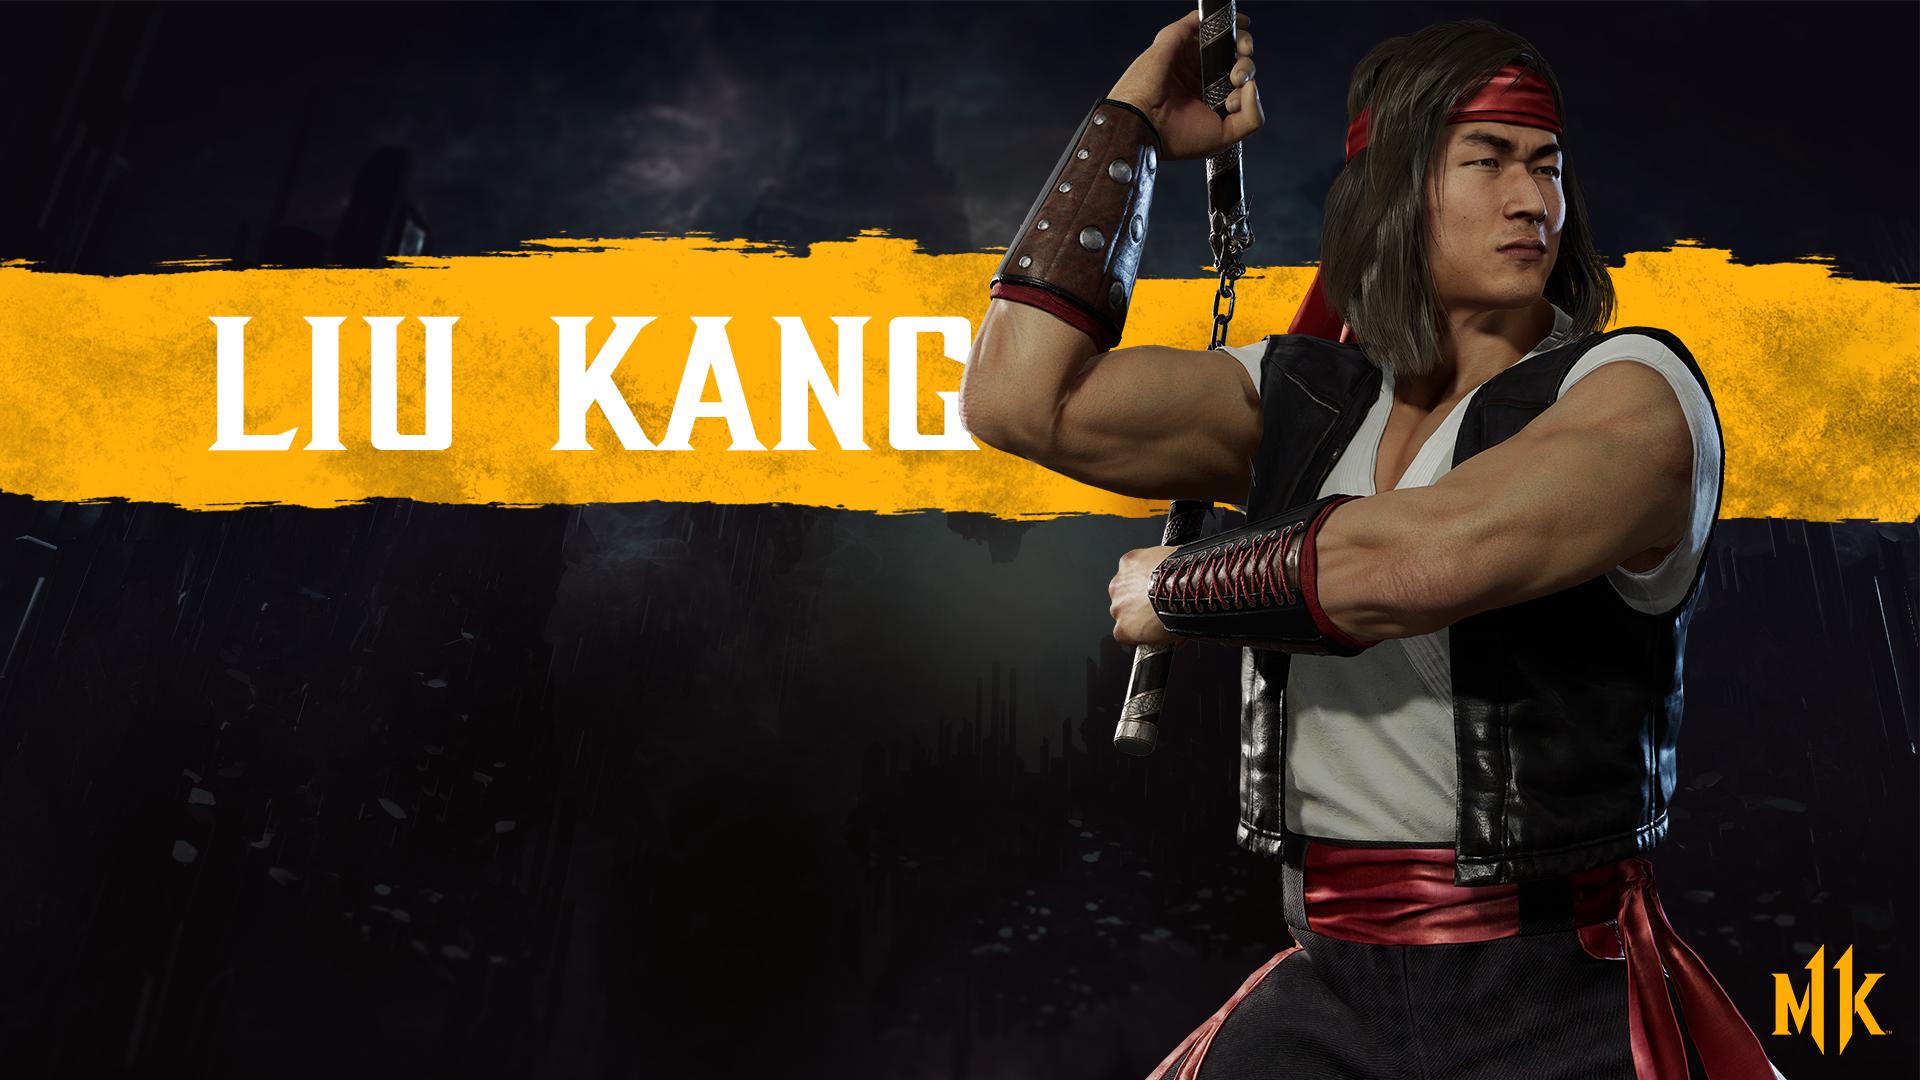 Mortal Kombat 11” Reveals Kombat Pack 2 and Ultimate Edition – The Cultured  Nerd